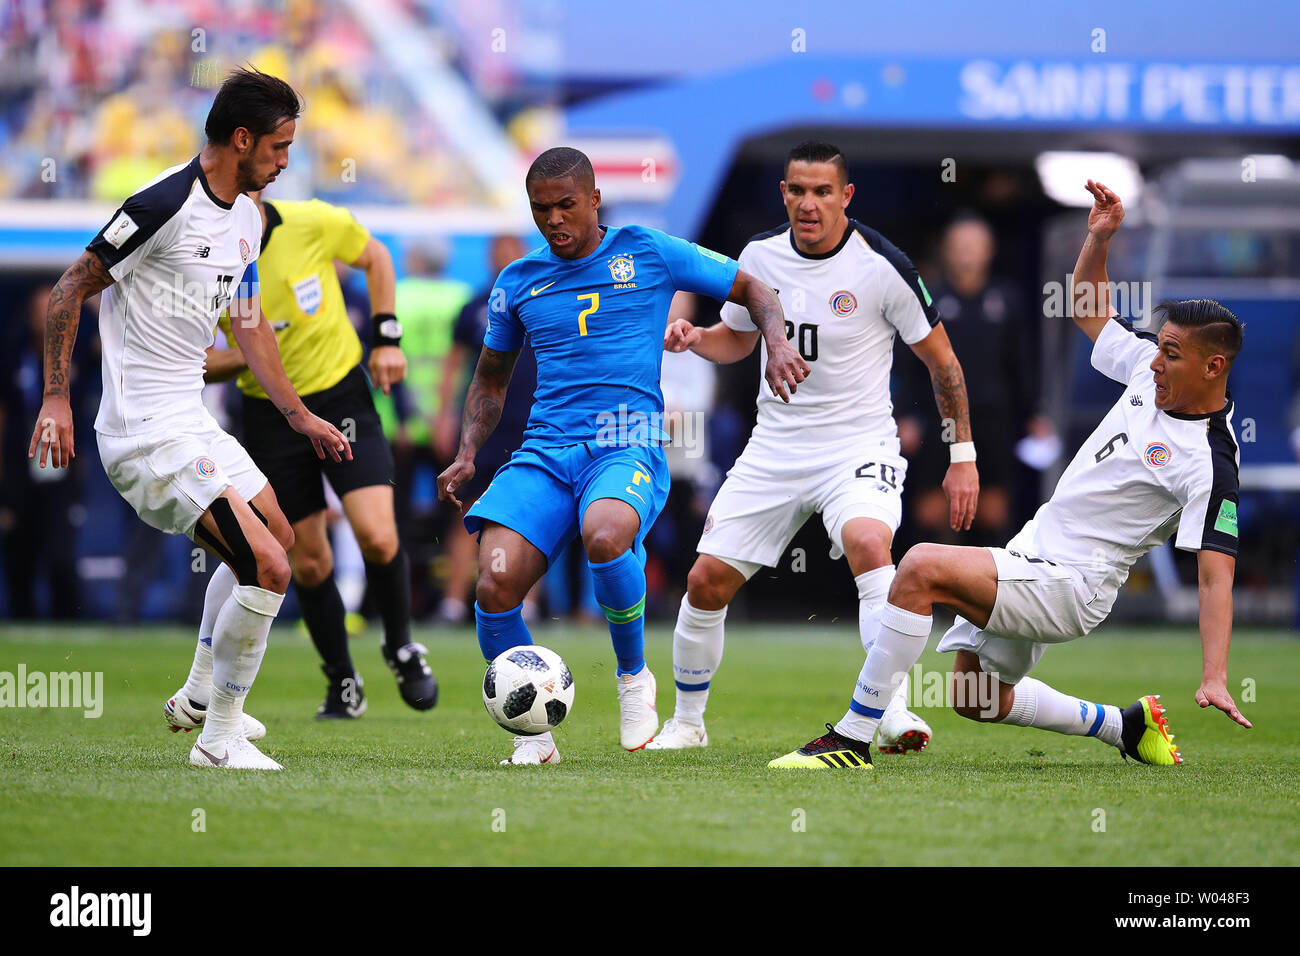 Douglas Costa (C) of Brazil in action with Bryan Ruiz (L) and Oscar Duarte of Costa Rica during the 2018 FIFA World Cup Group E match at the Saint Petersburg Stadium in Saint Petersburg, Russia on June 22, 2018. Photo by Chris Brunskill/UPI Stock Photo